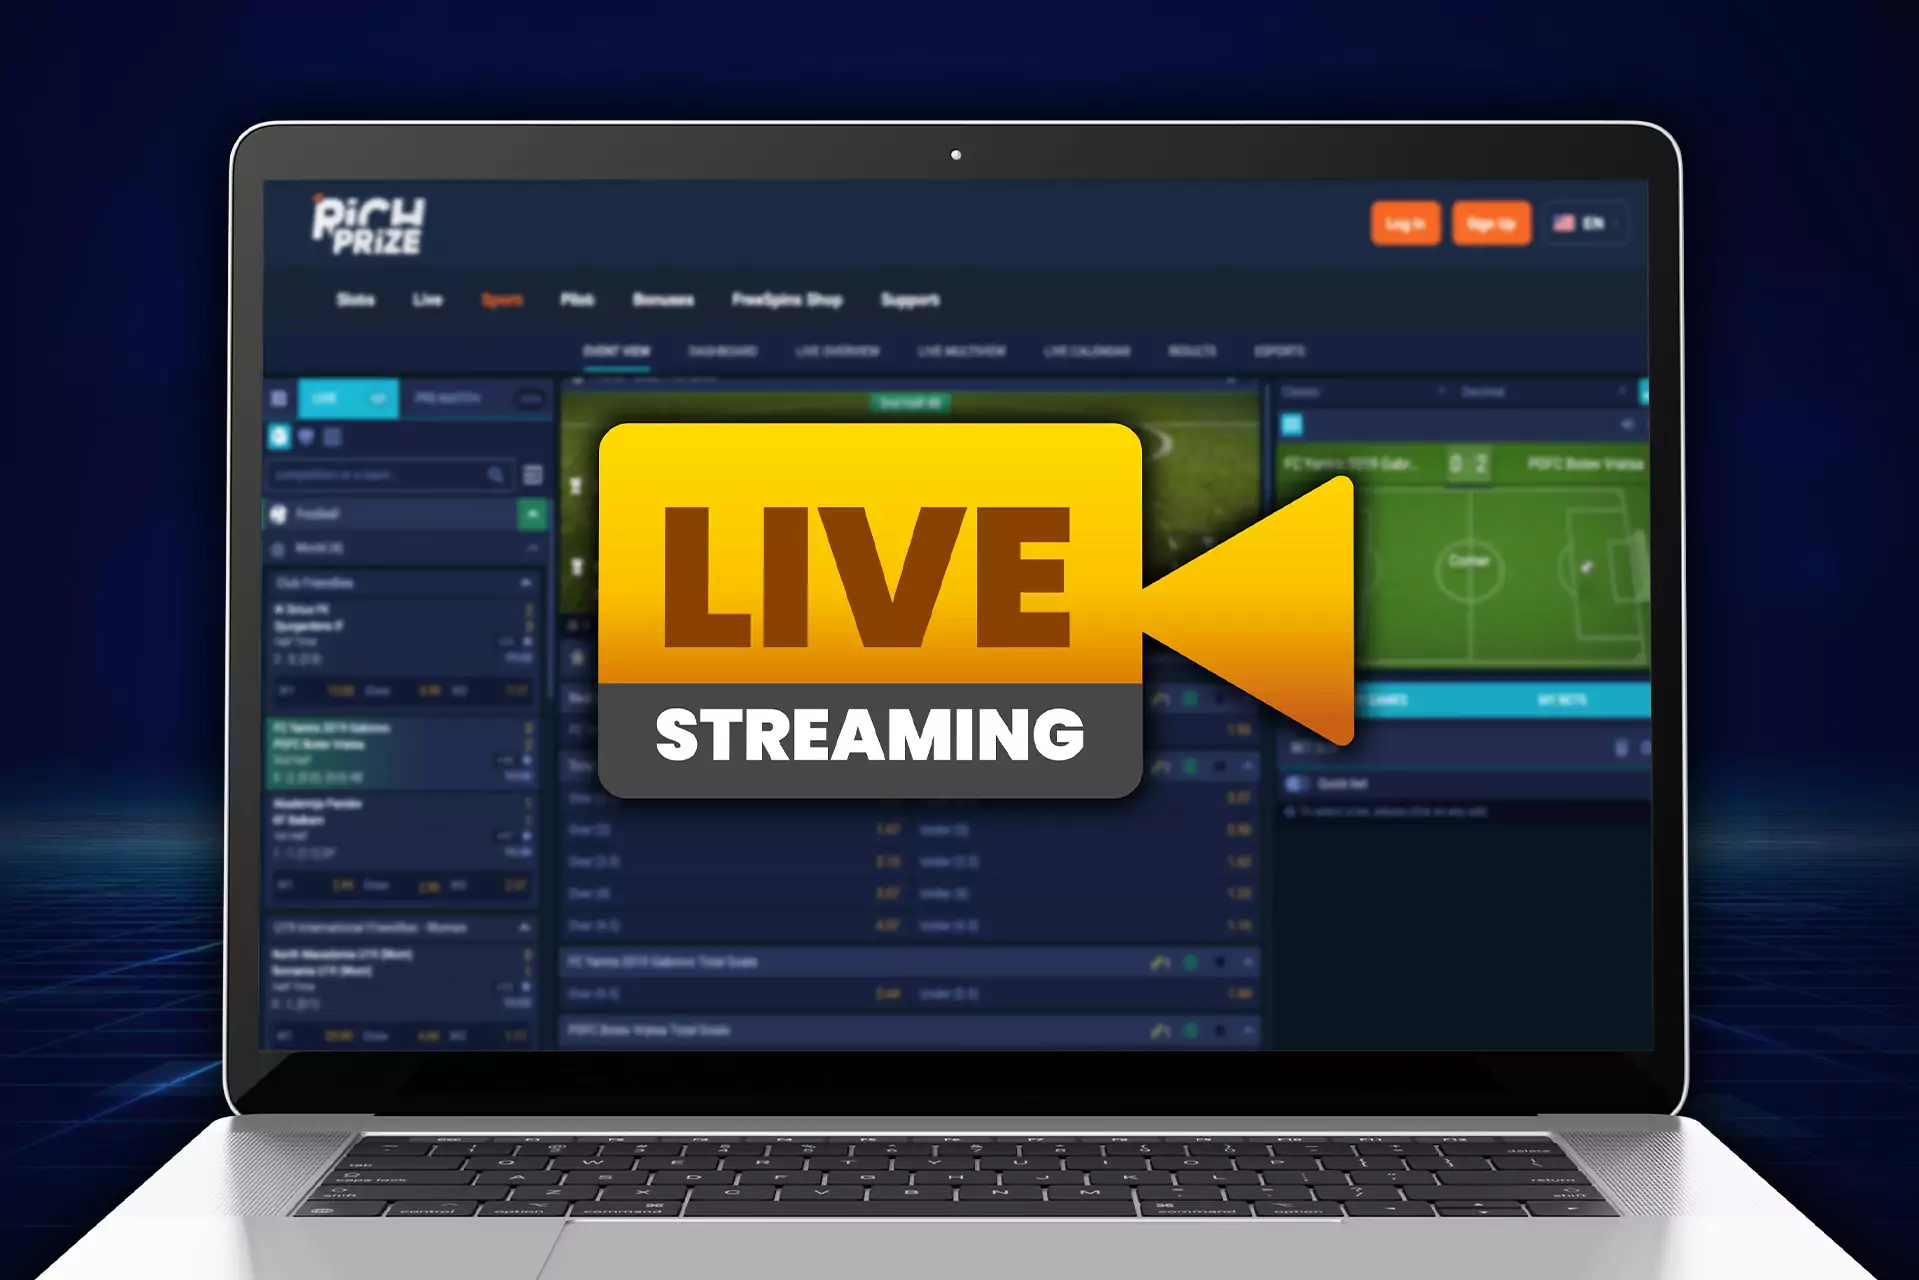 During an event, you can watch the stream and change your bet.